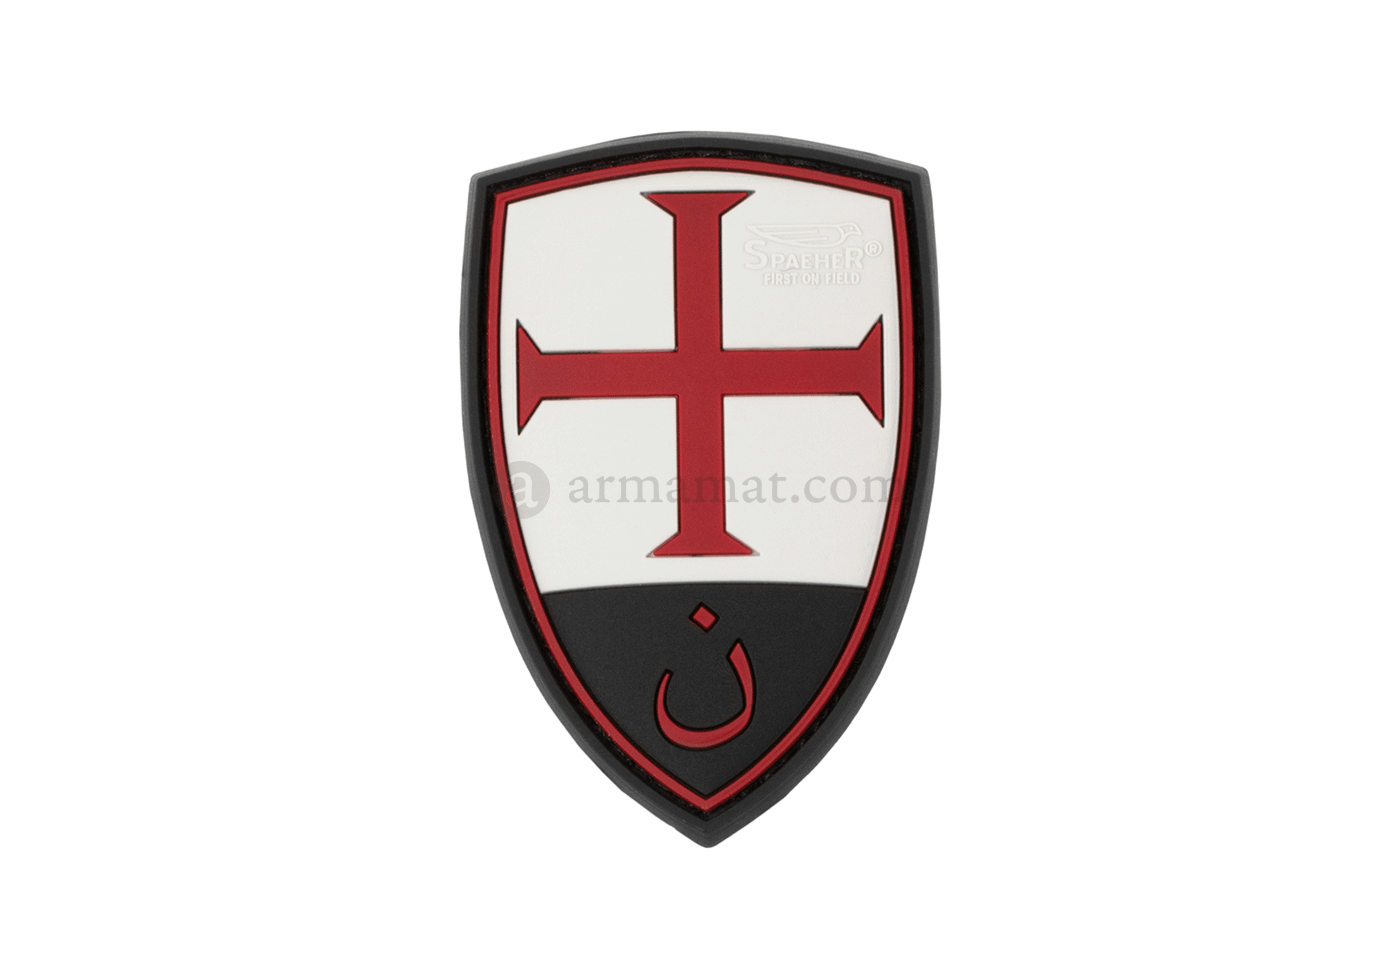 Crusader Shield Logo - Crusader Shield Rubber Patch Color (JTG) - Rubber Patches - Patches ...